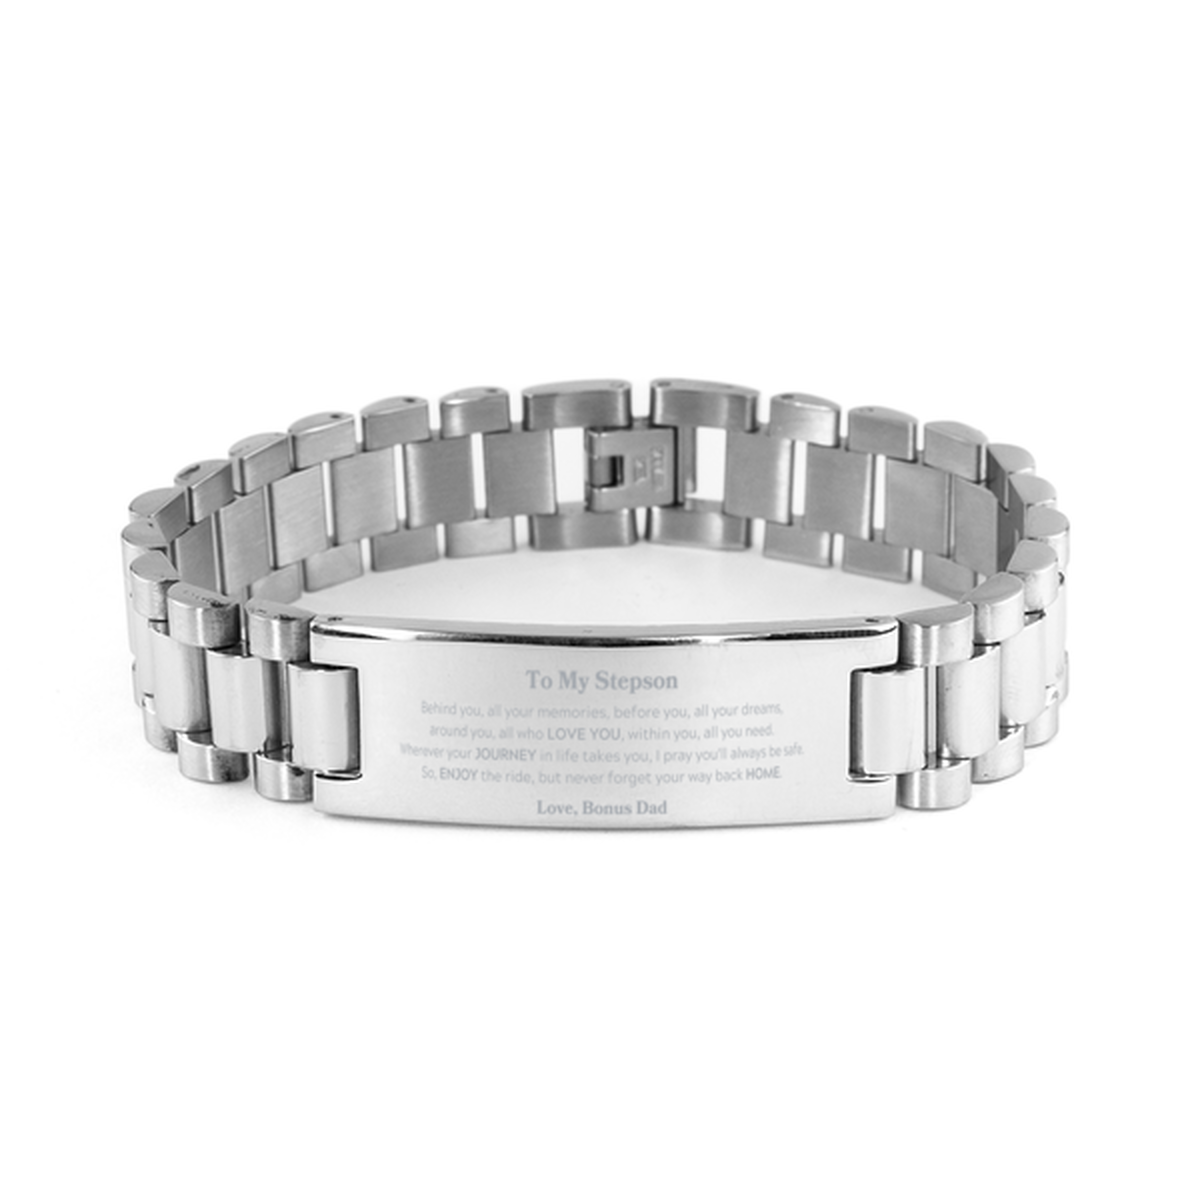 To My Stepson Graduation Gifts from Bonus Dad, Stepson Ladder Stainless Steel Bracelet Christmas Birthday Gifts for Stepson Behind you, all your memories, before you, all your dreams. Love, Bonus Dad